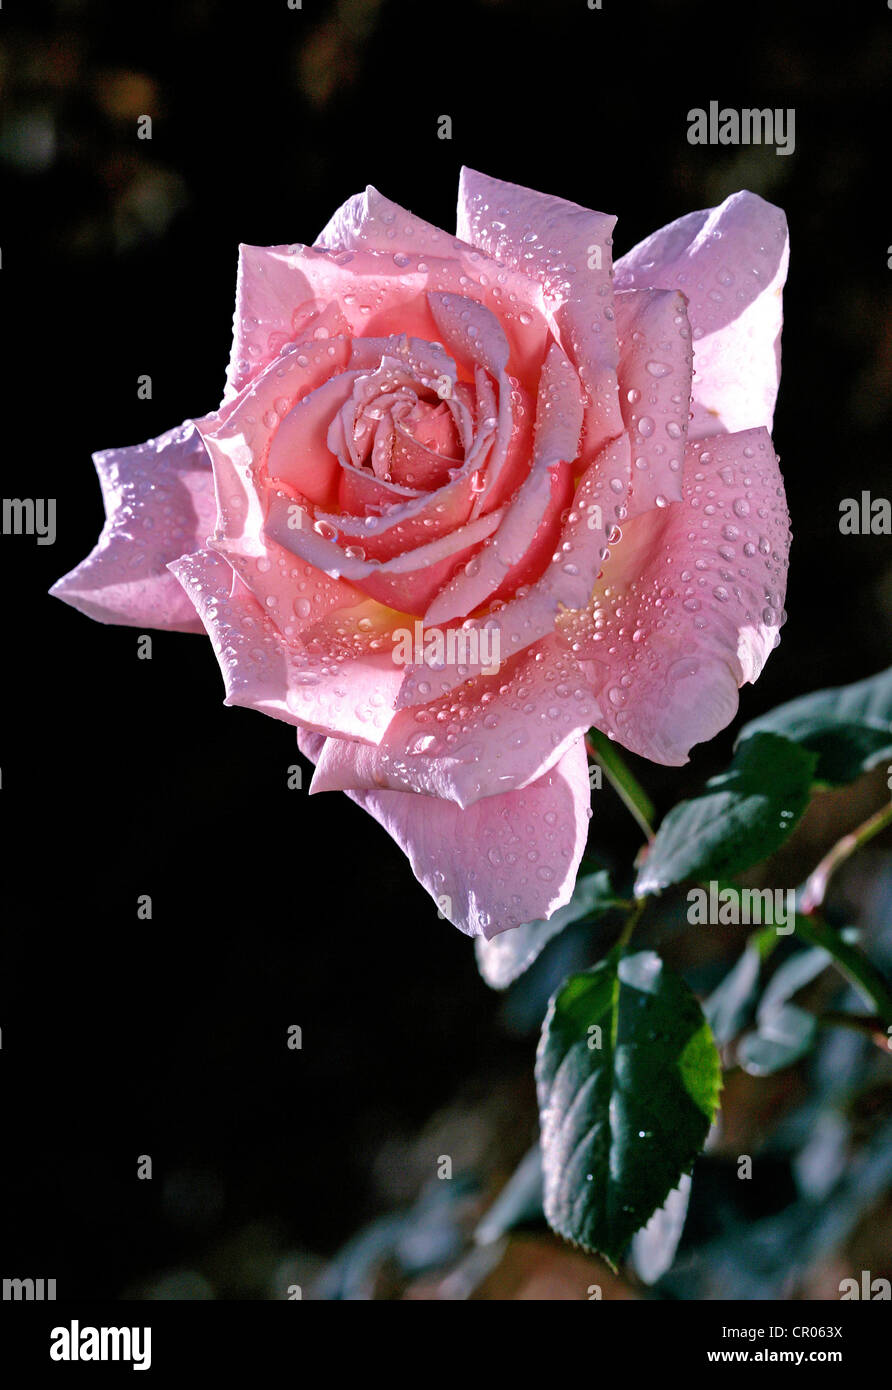 Rose (Rosa), scented rose, variety Provence, with dew drops Stock Photo